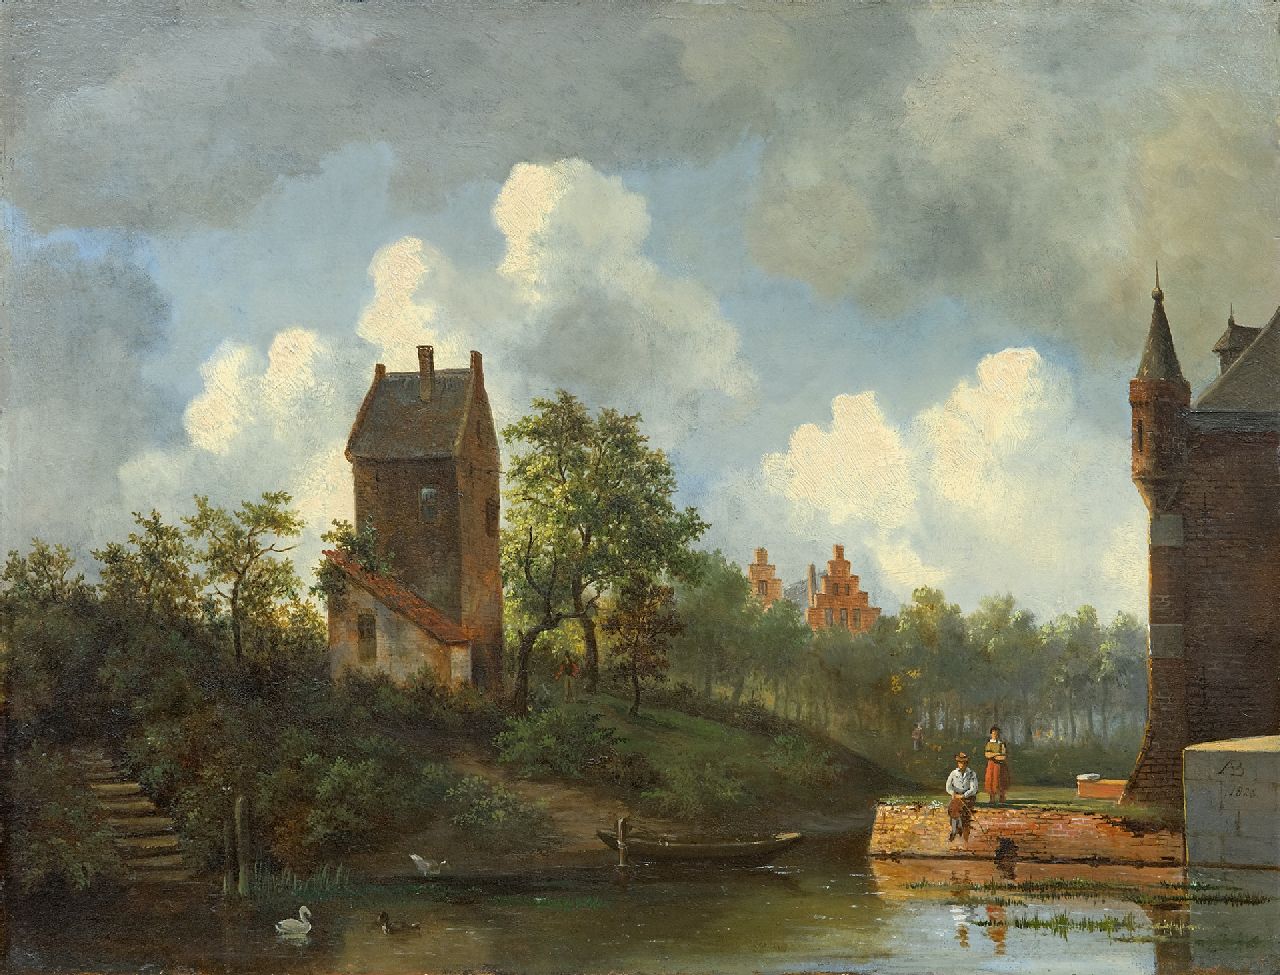 Brondgeest A.  | Albertus Brondgeest, Angler by a moat, oil on panel 34.5 x 45.0 cm, signed l.r. with monogram and dated 1826